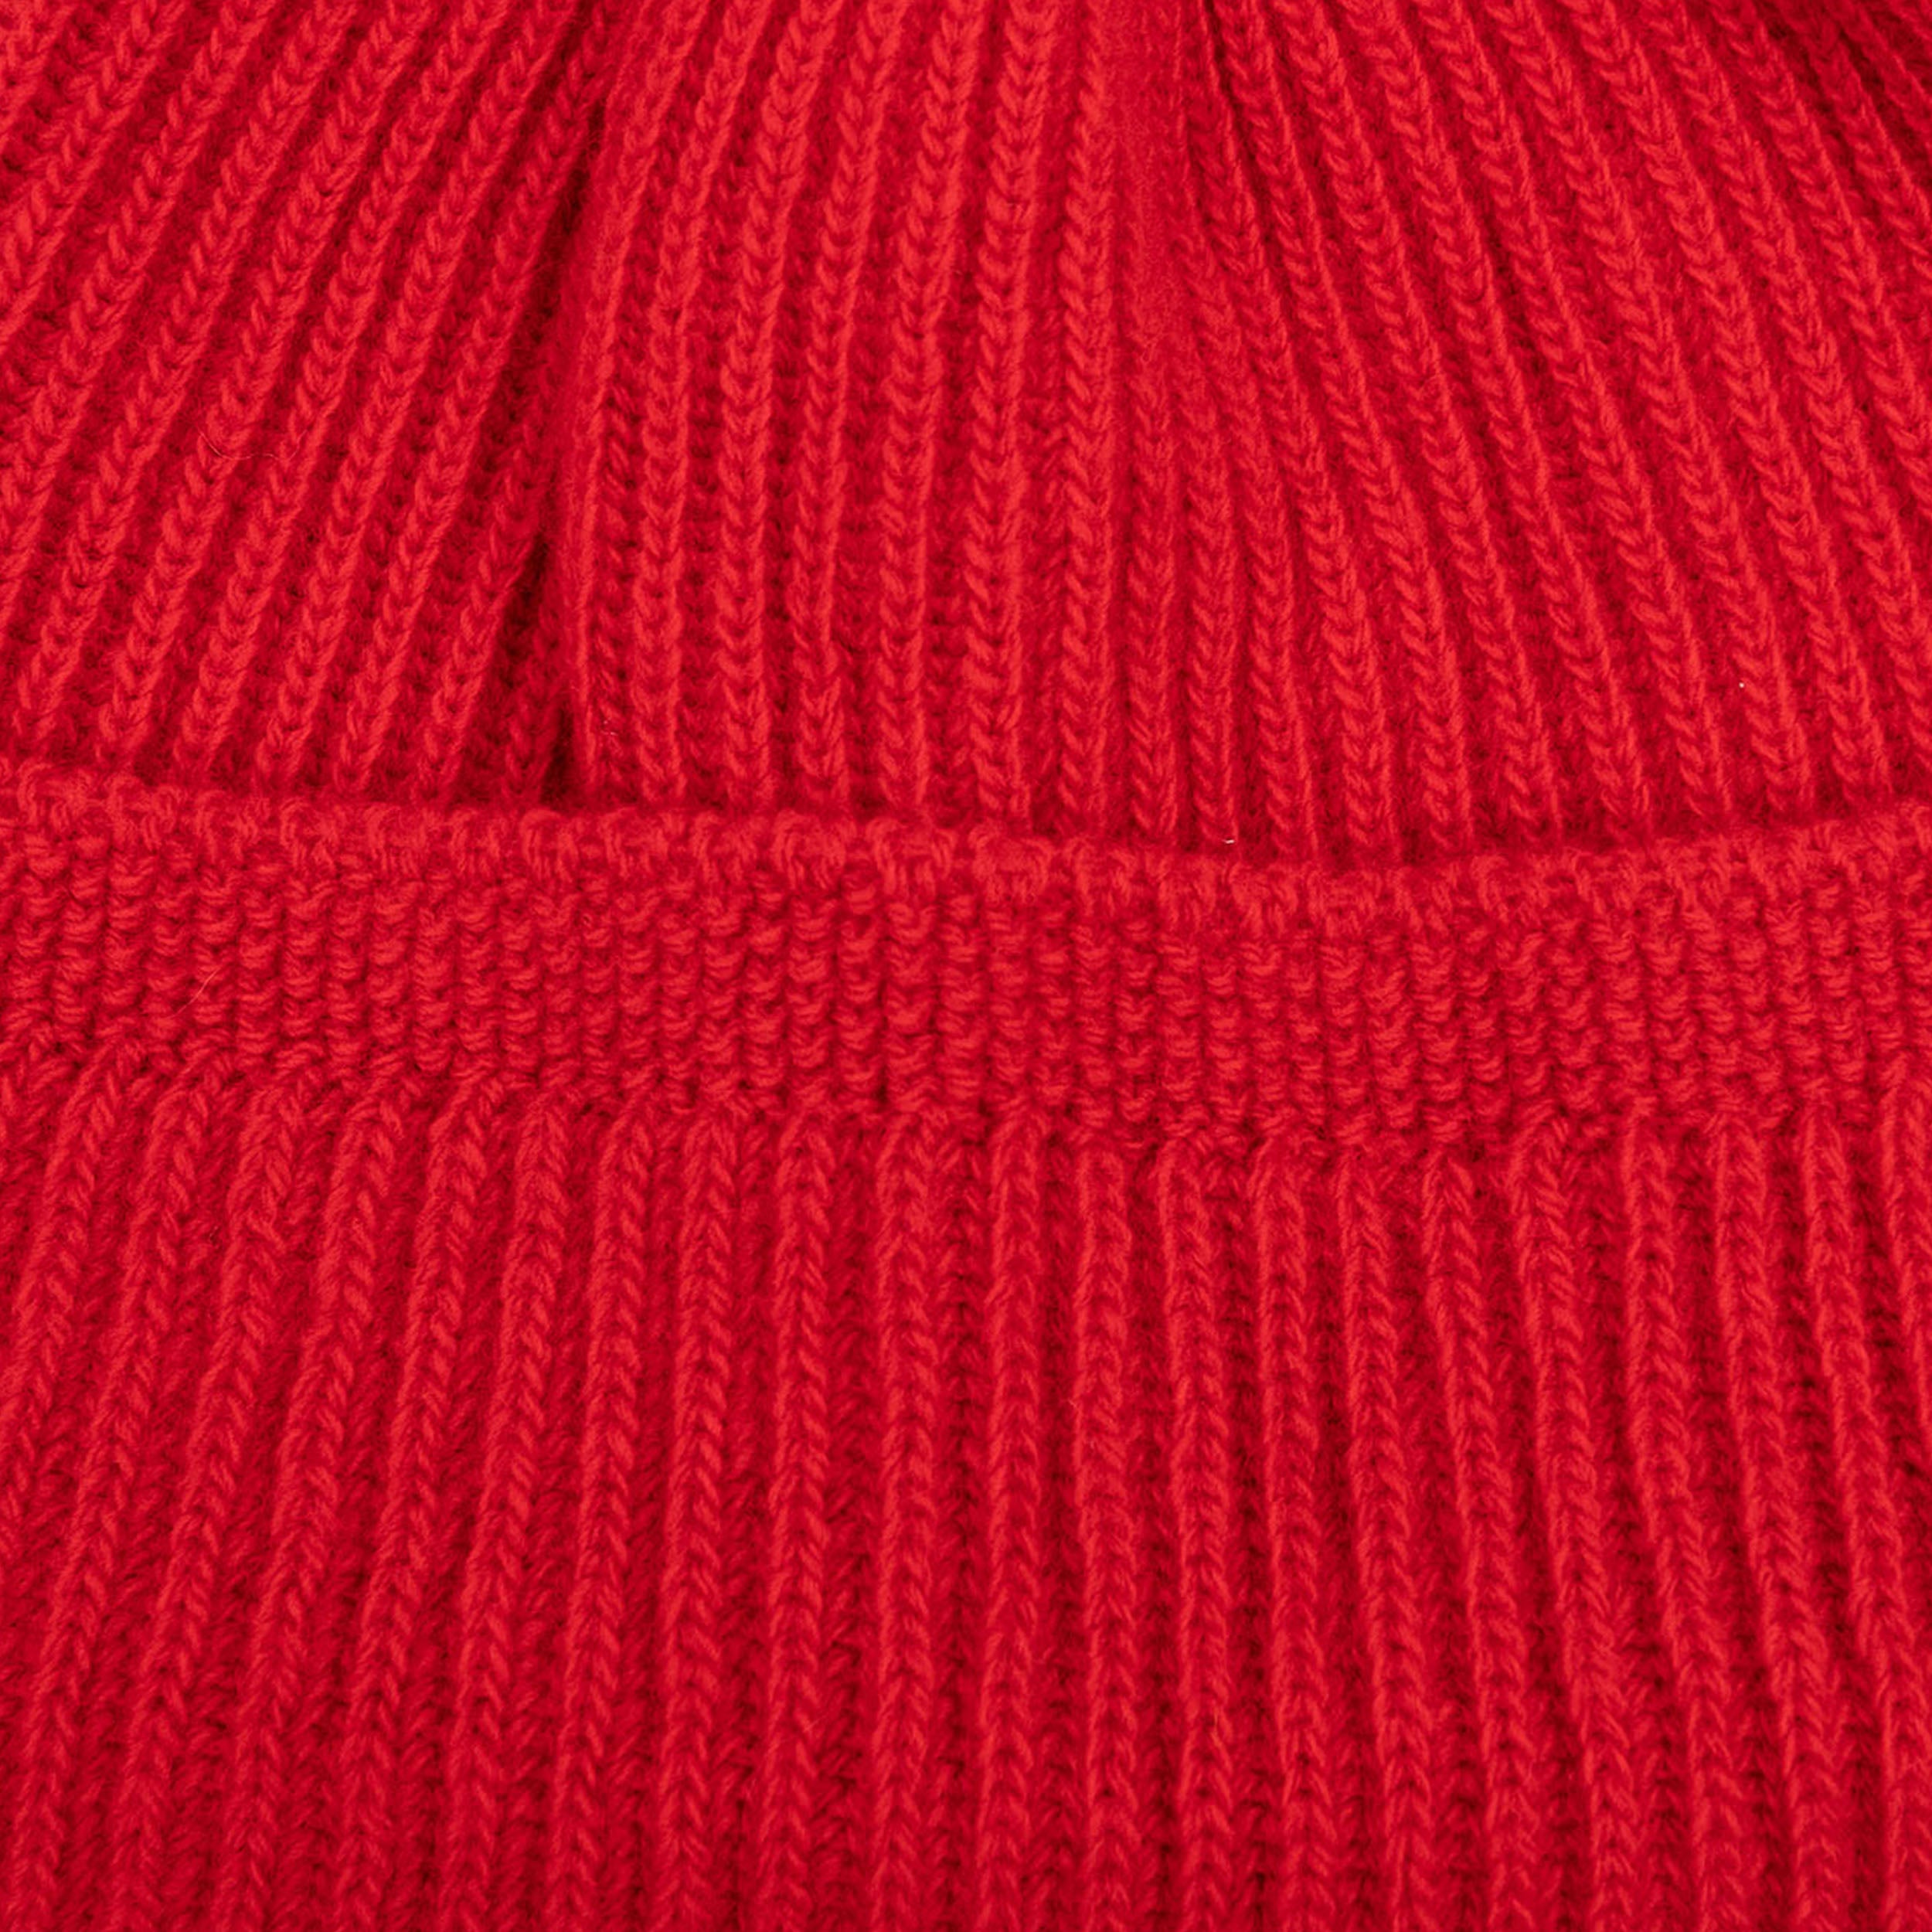 Carrier Company Wool Hat in Poppy Red